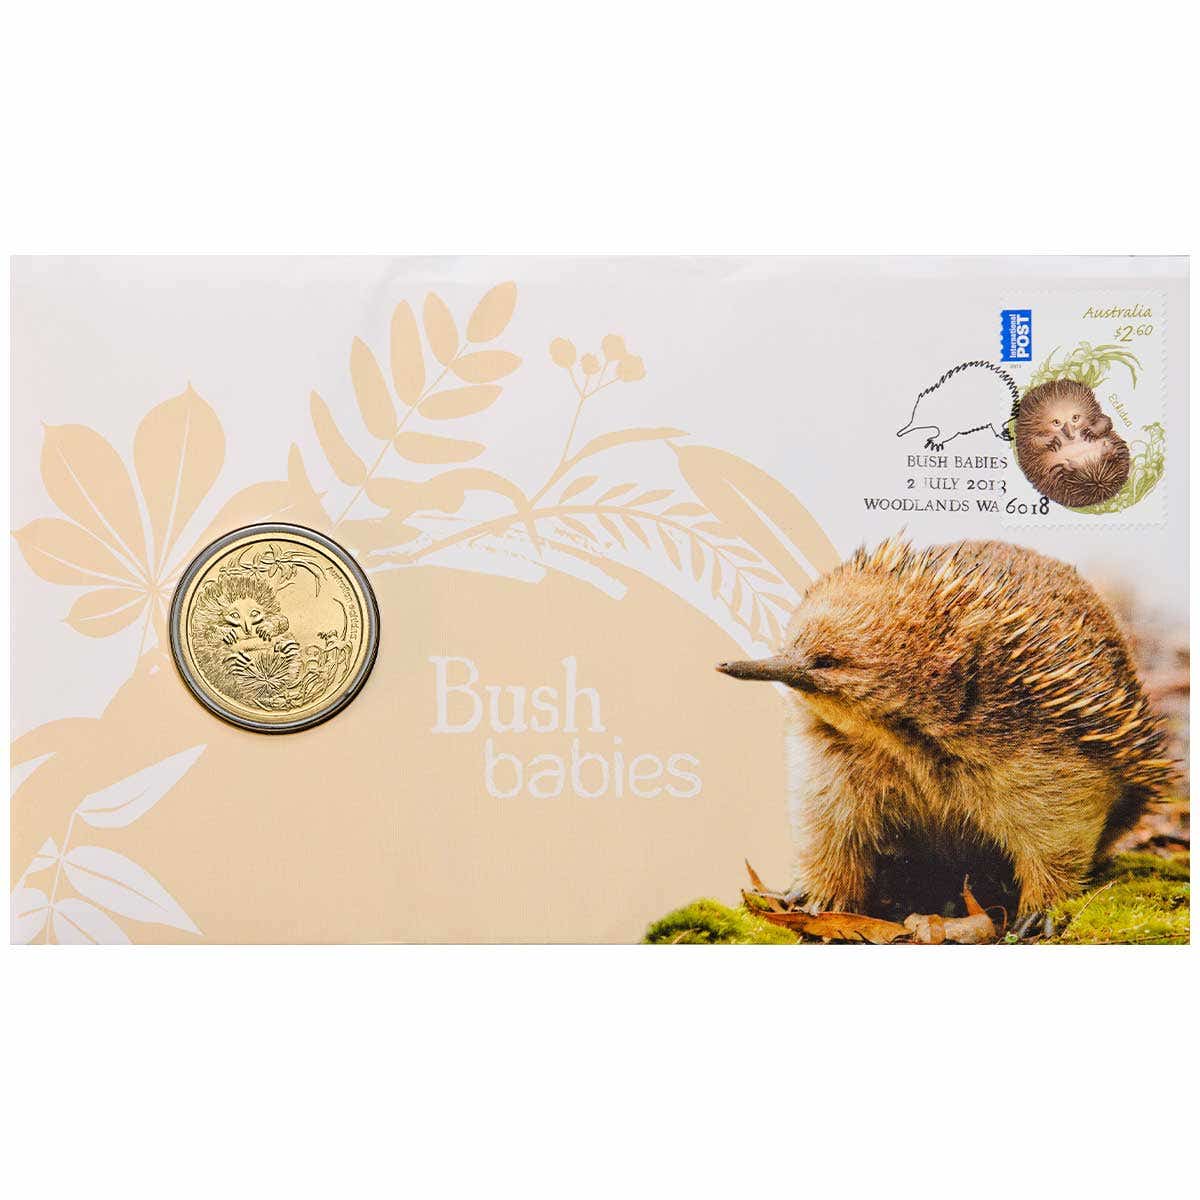 Bush Babies Echidna 2013 $1 Stamp & Coin Cover